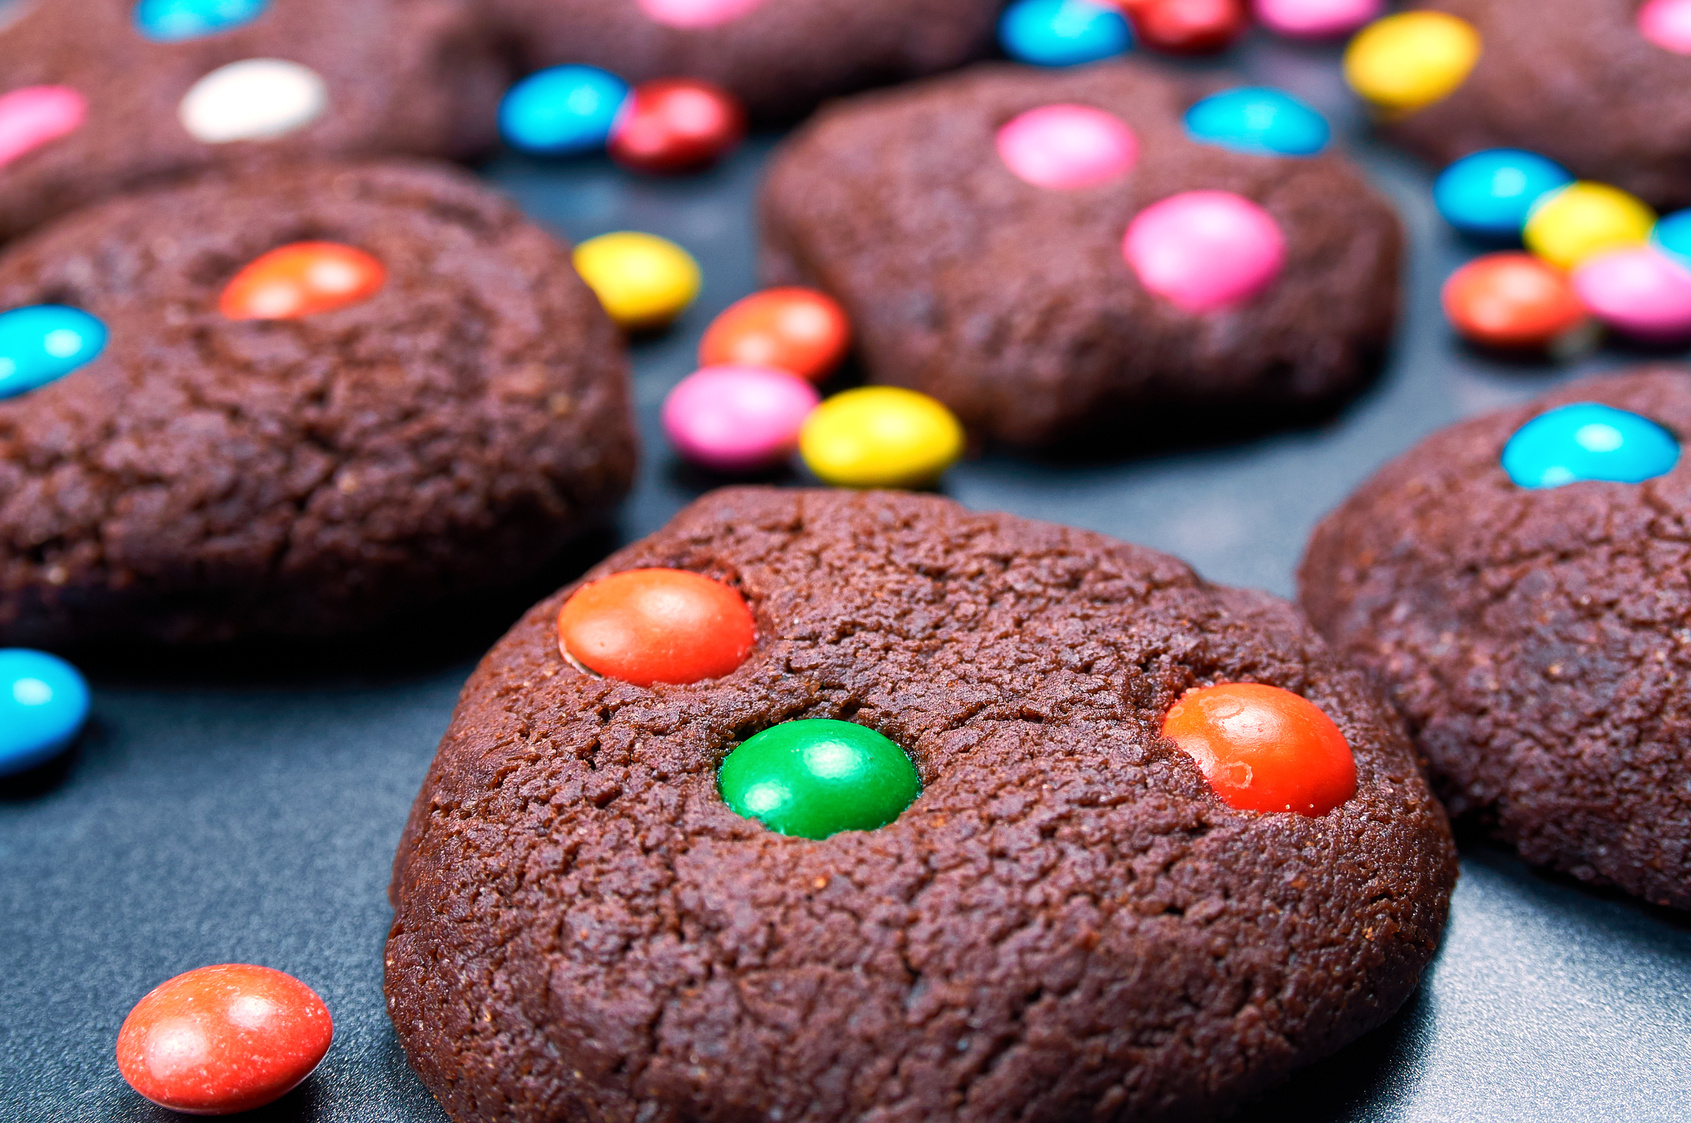 Chocolate cakes made by children. Cookies with colorful candies